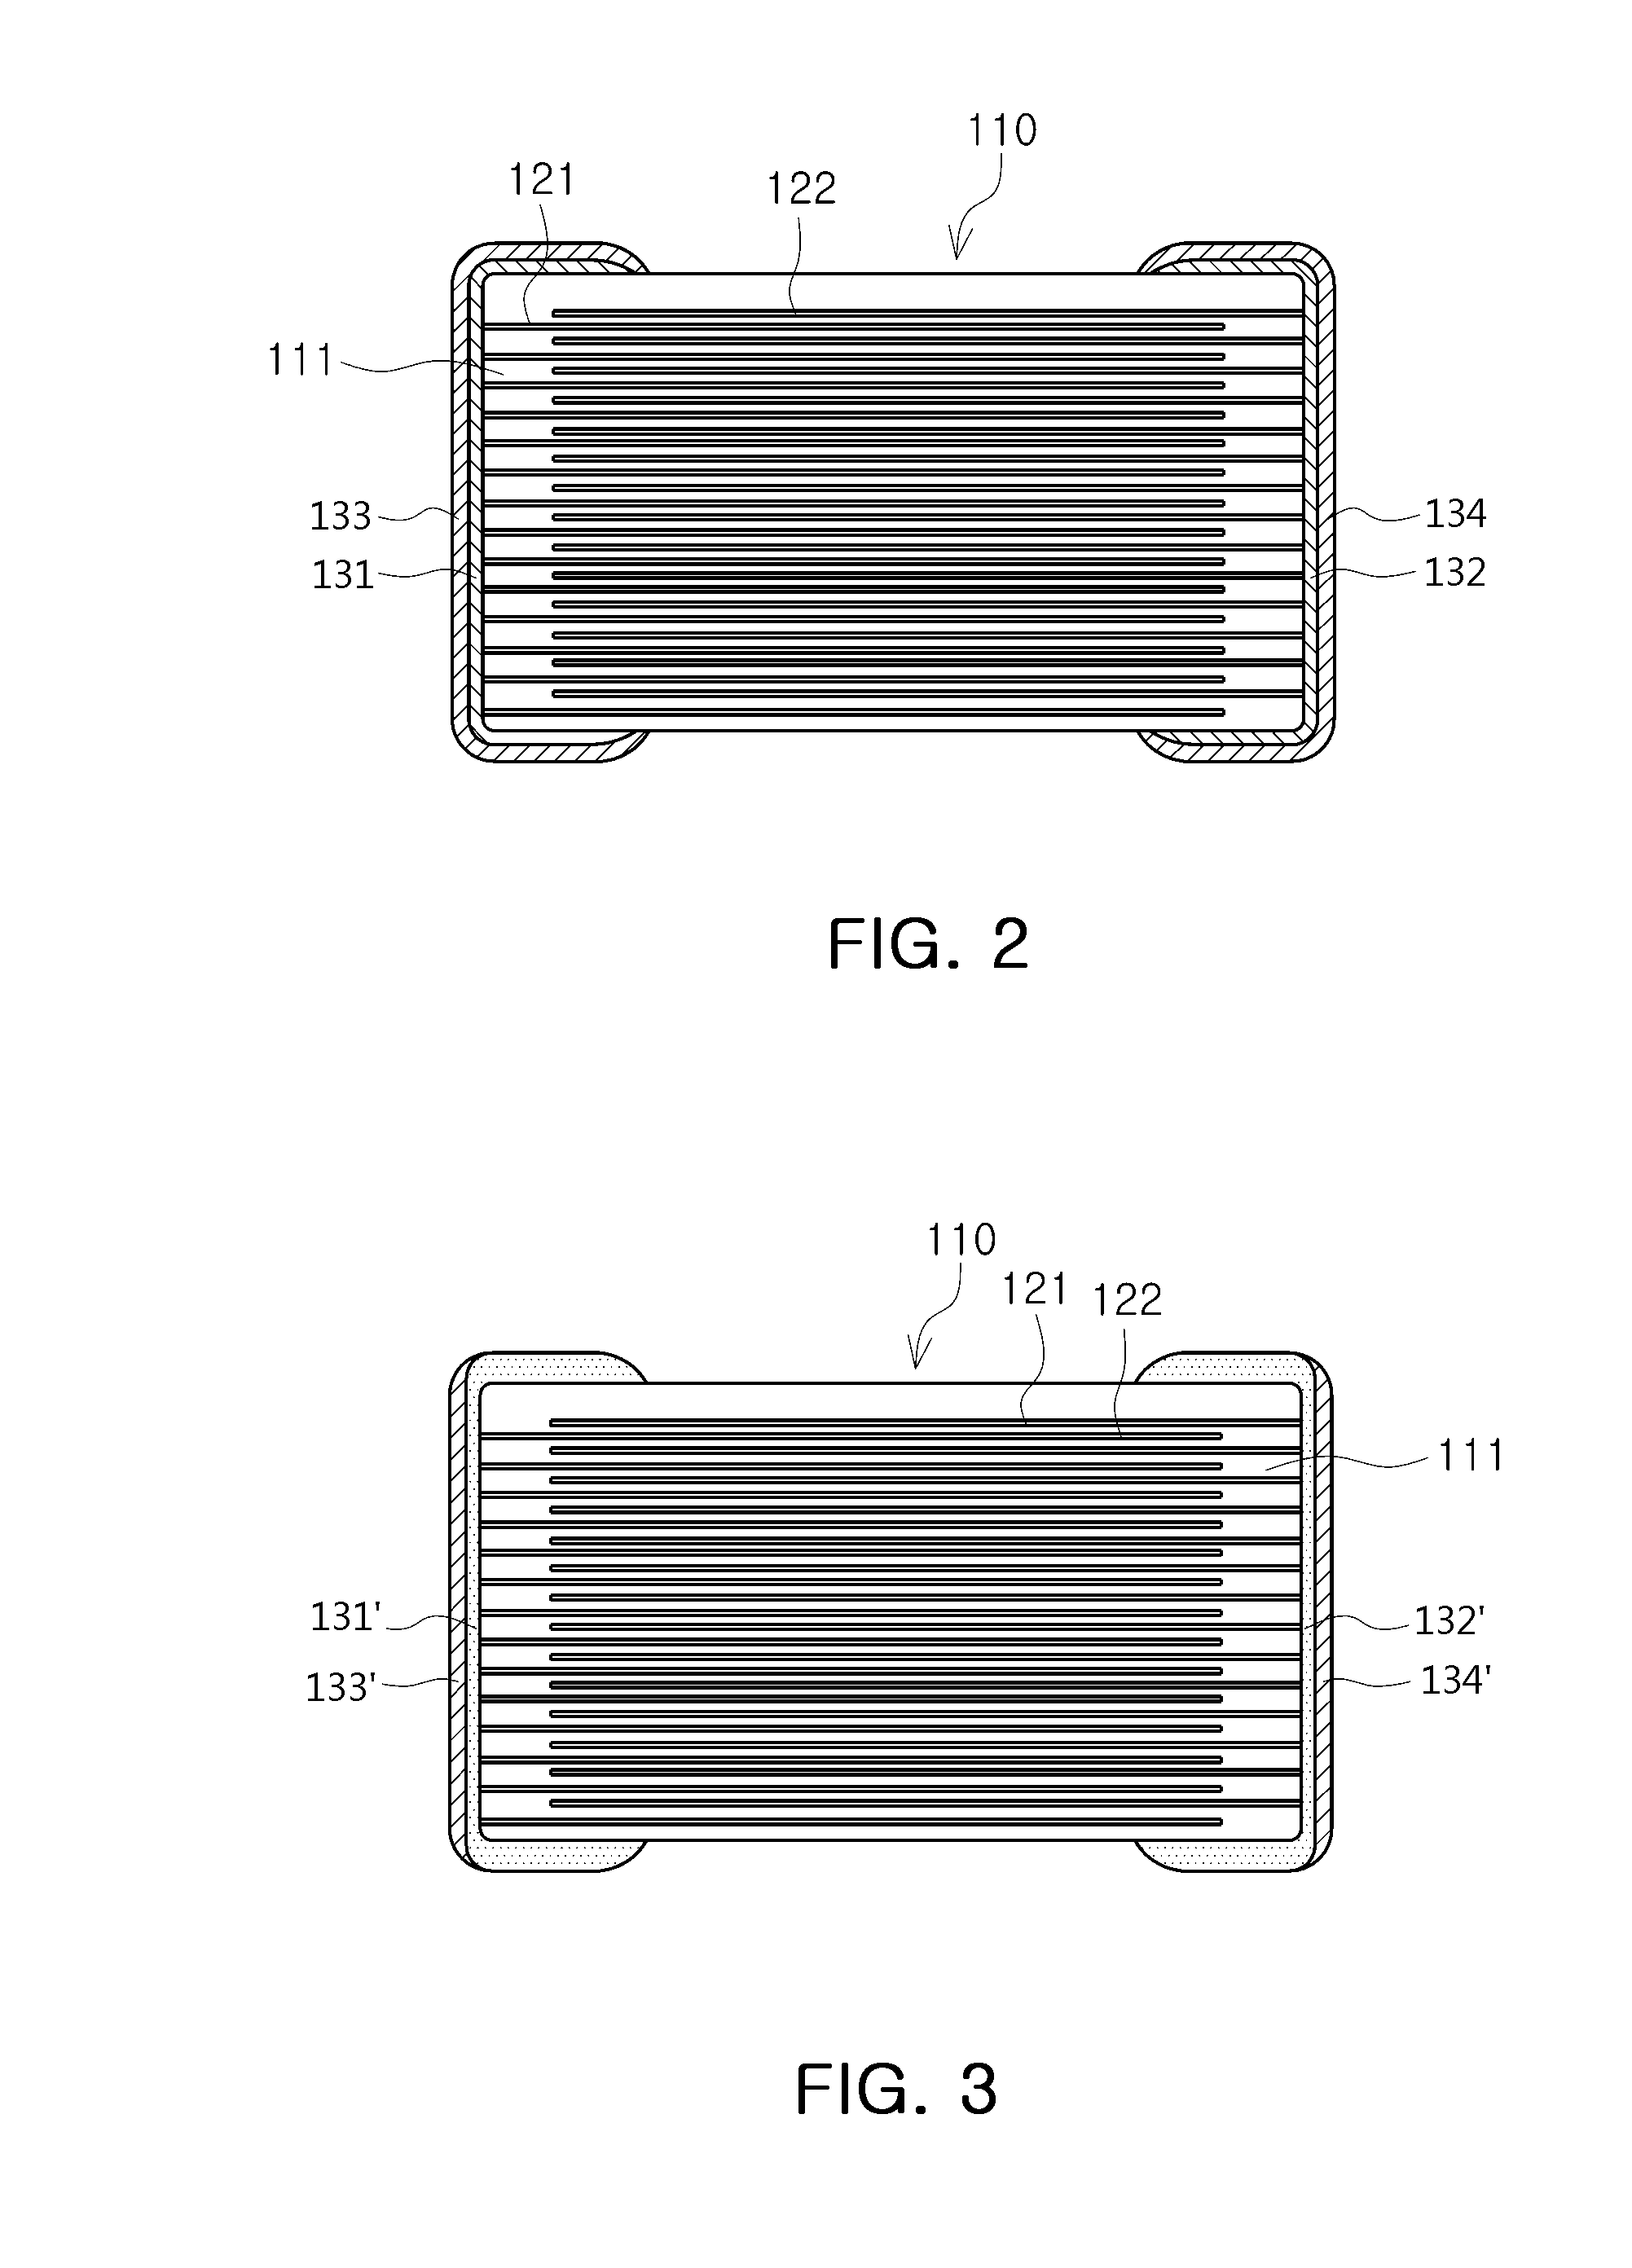 Multilayered ceramic electronic component and manufacturing method of the same